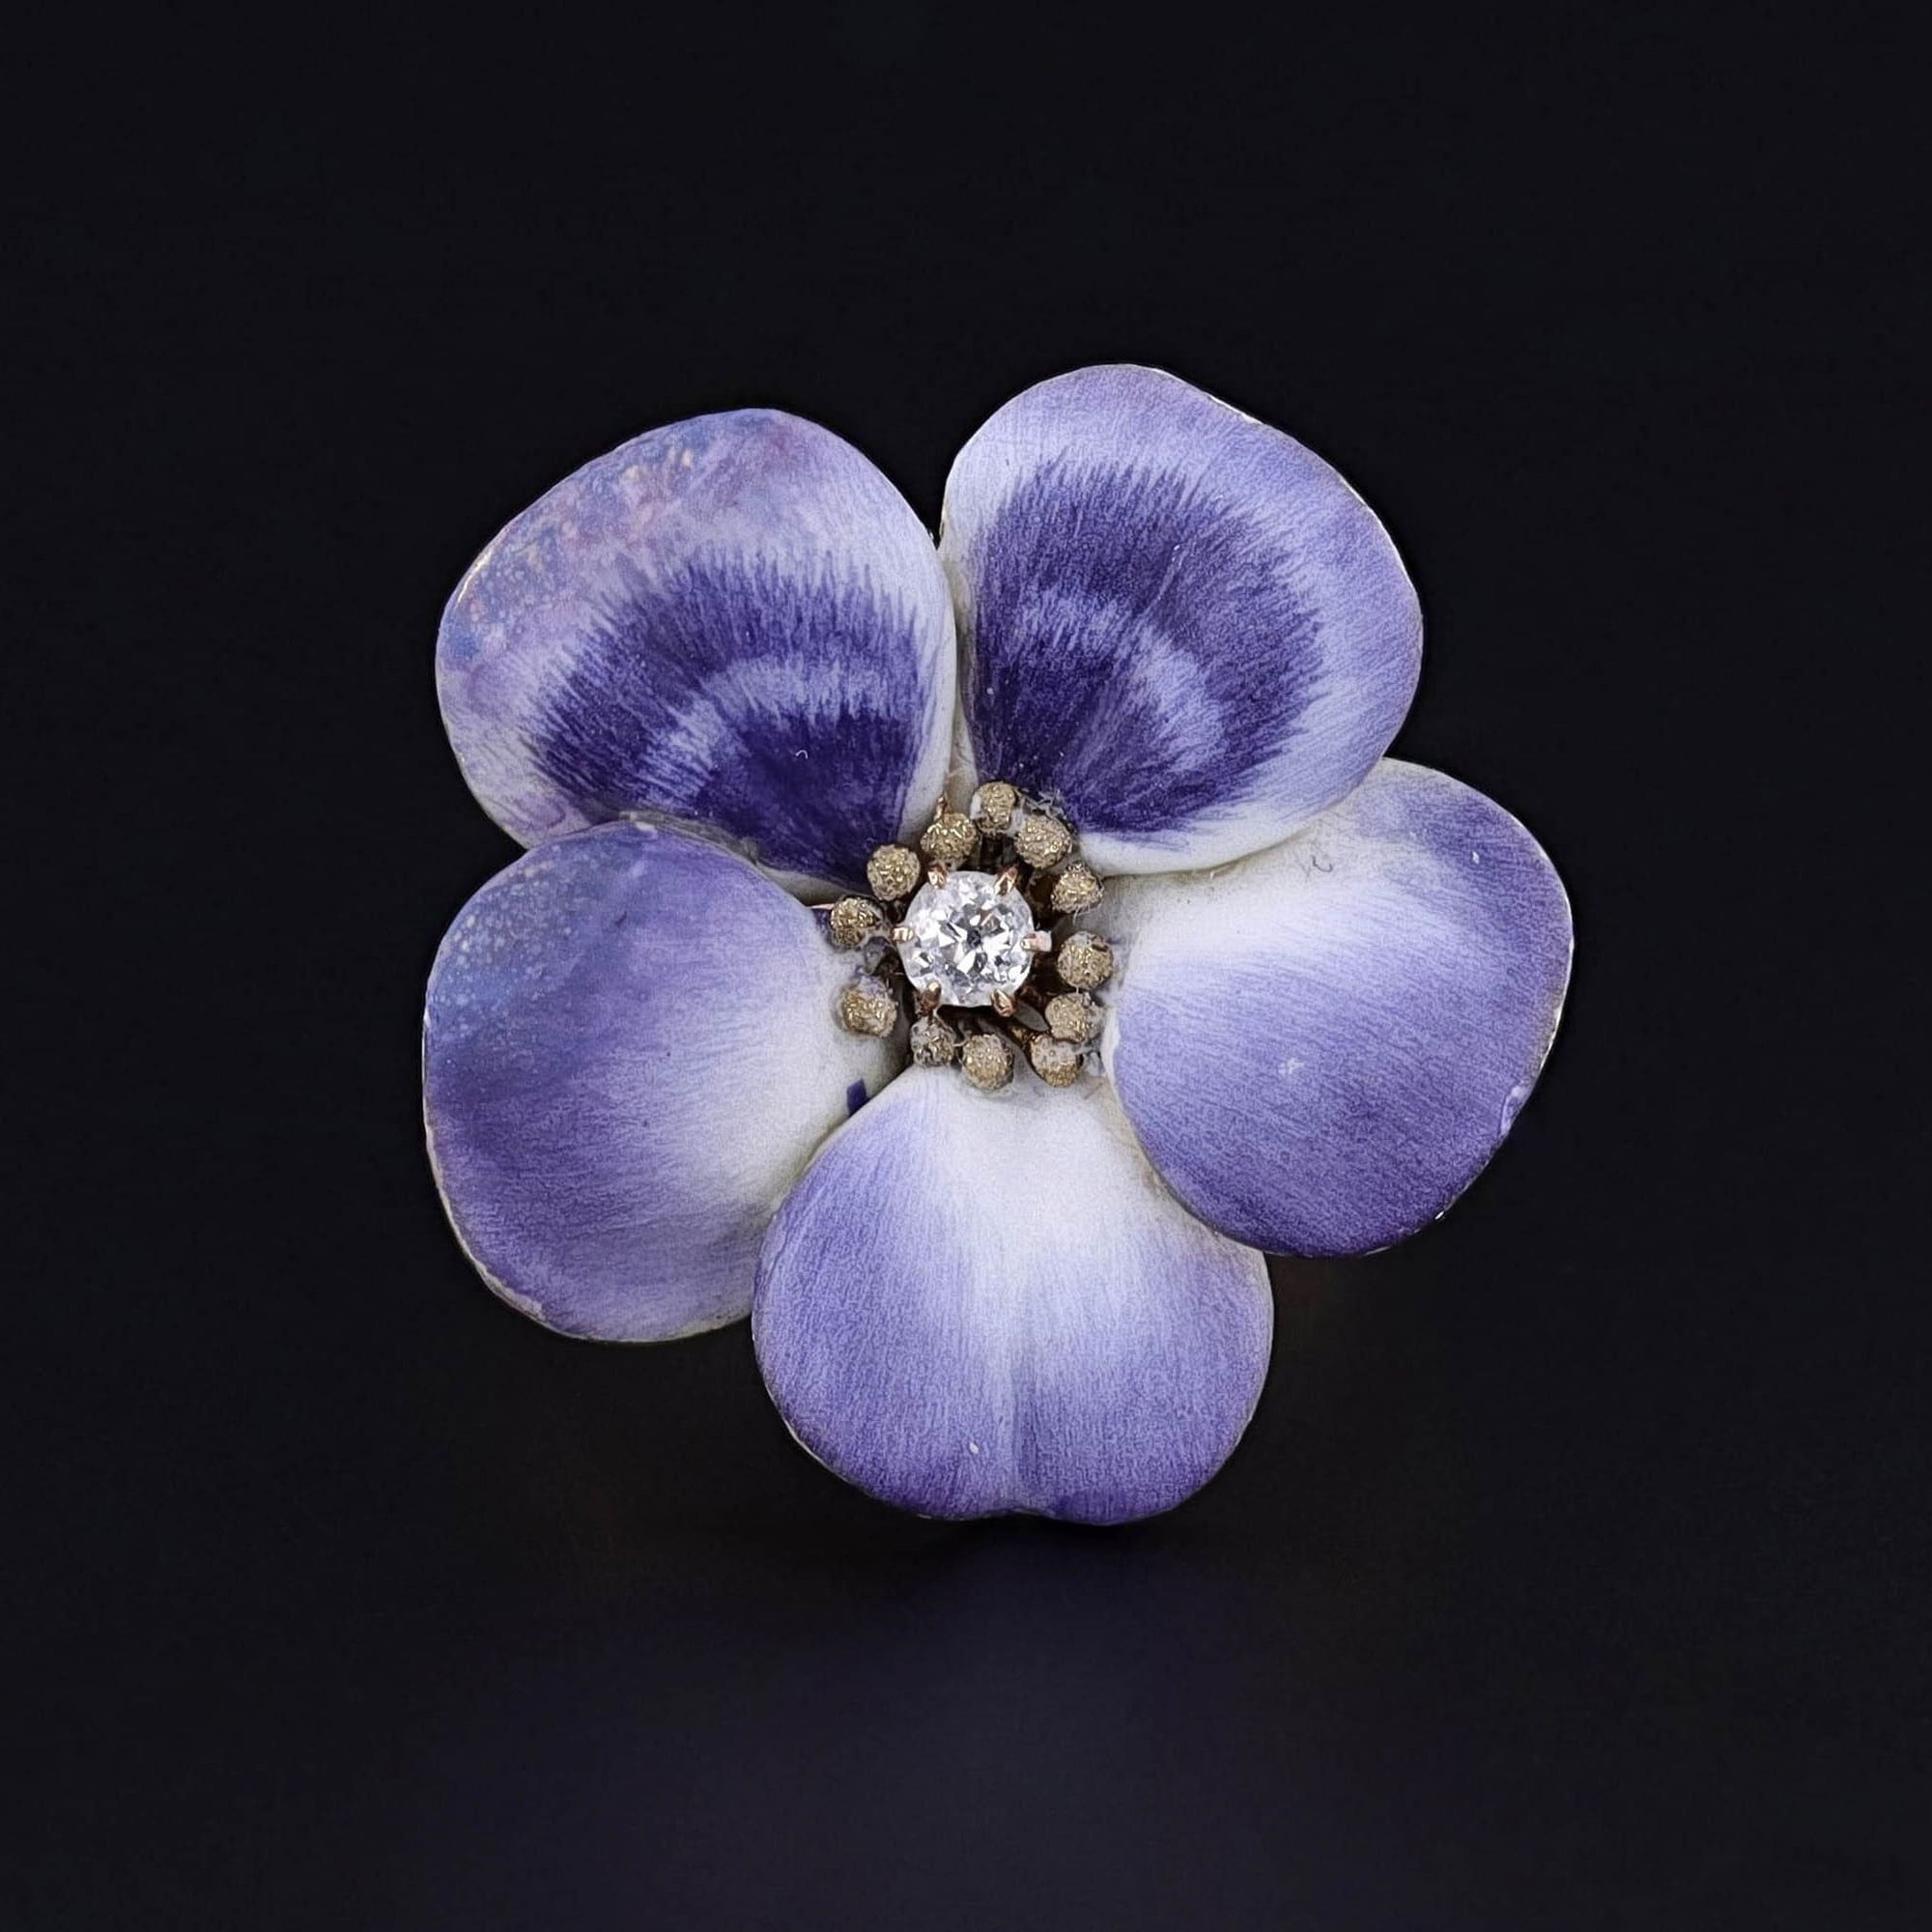 Antique Enamel and Diamond Flower Conversion Ring of 14k Gold